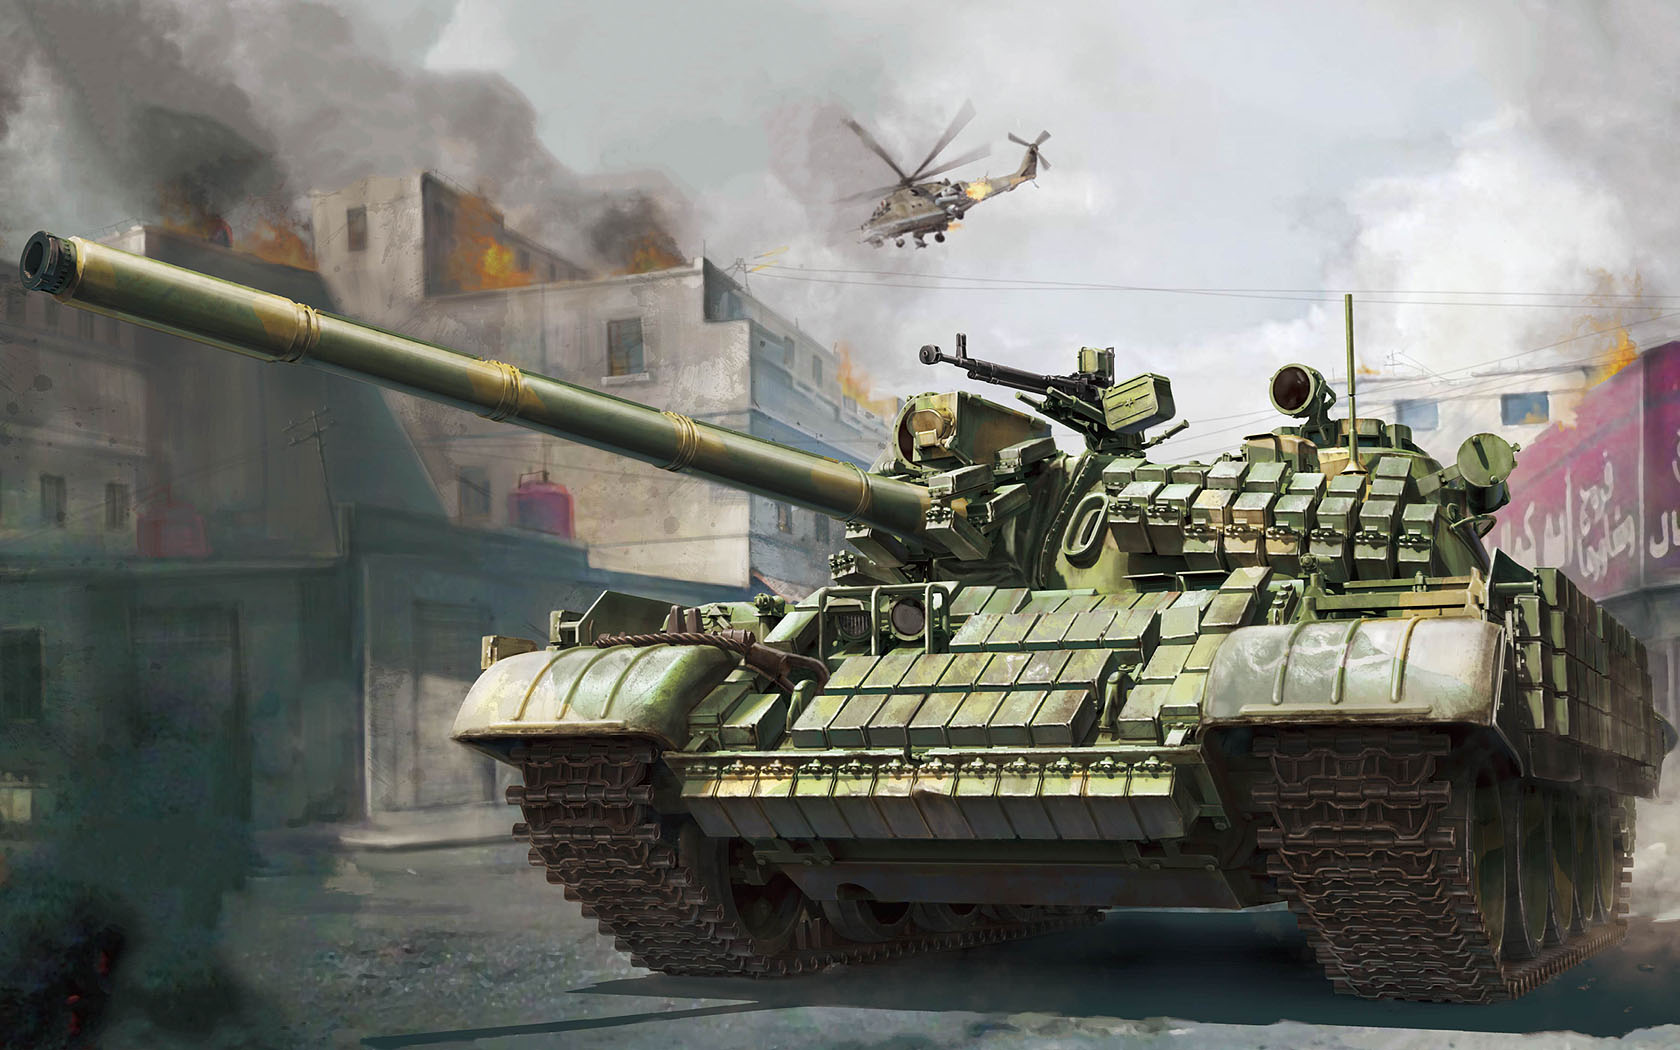 General 1680x1050 tank army military military vehicle artwork helicopters building smoke fire frontal view T-55 Middle East Syria Boxart city war Russian/Soviet tanks